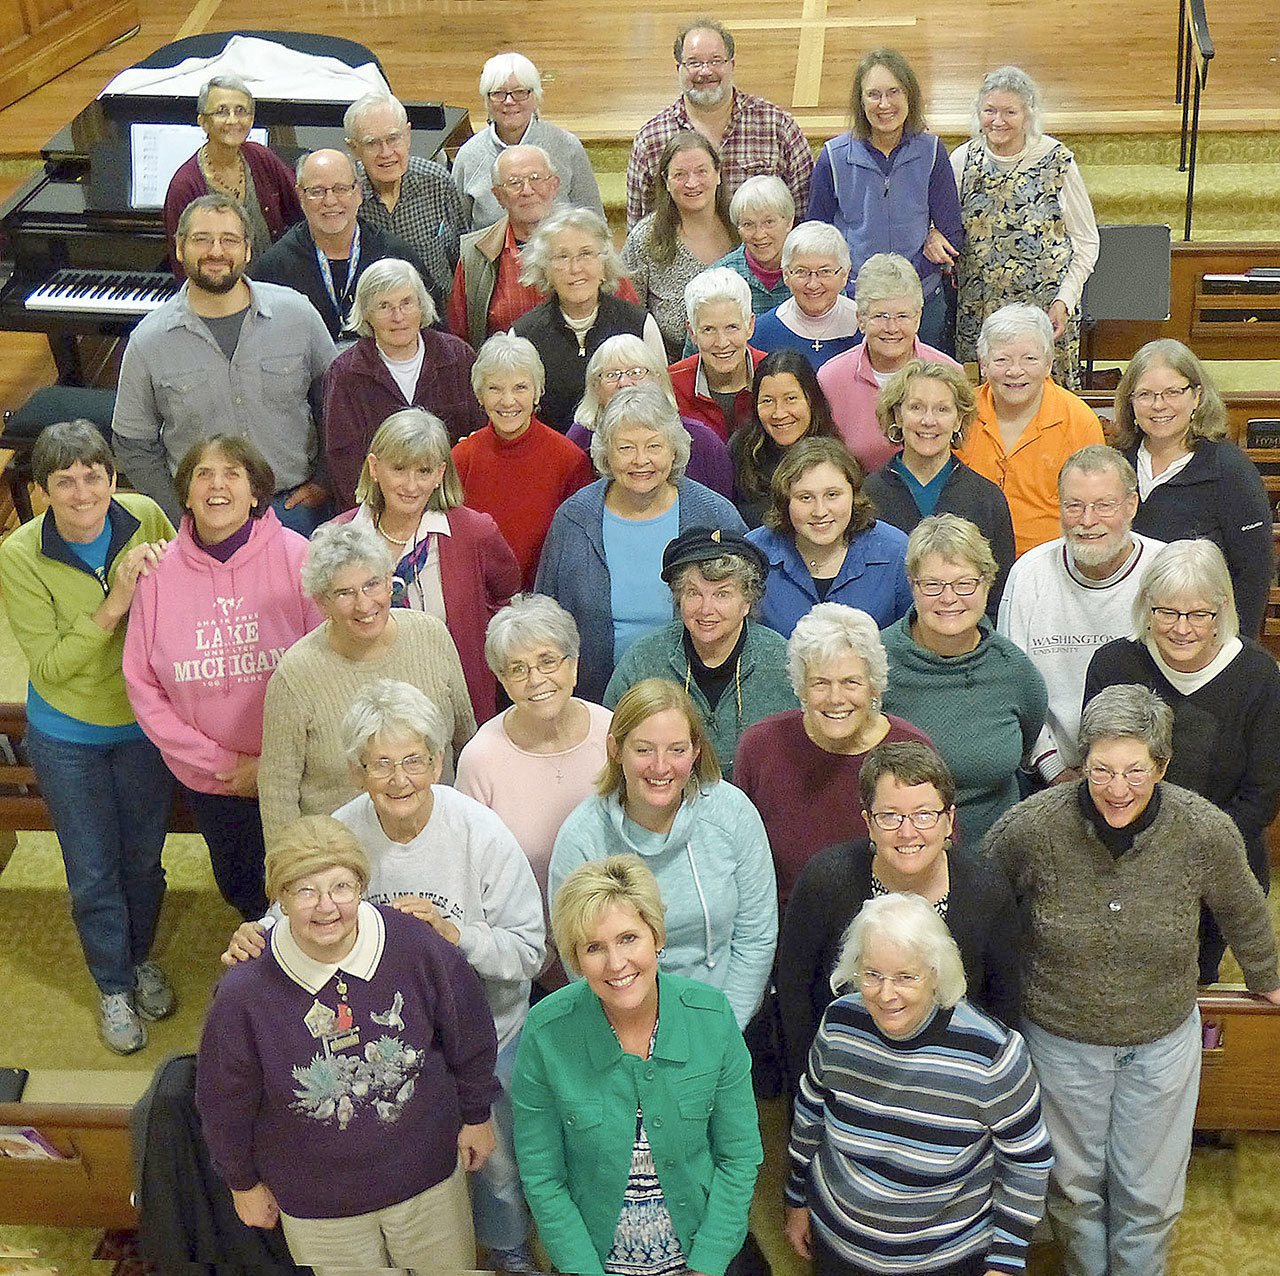 The Community Chorus of Port Townsend and East Jefferson County, seen here, will perform a holiday concert this evening with second concert Sunday at the First PresbyterianChurch, 1111 Franklin St., in Port Townsend. (Sue Reid)